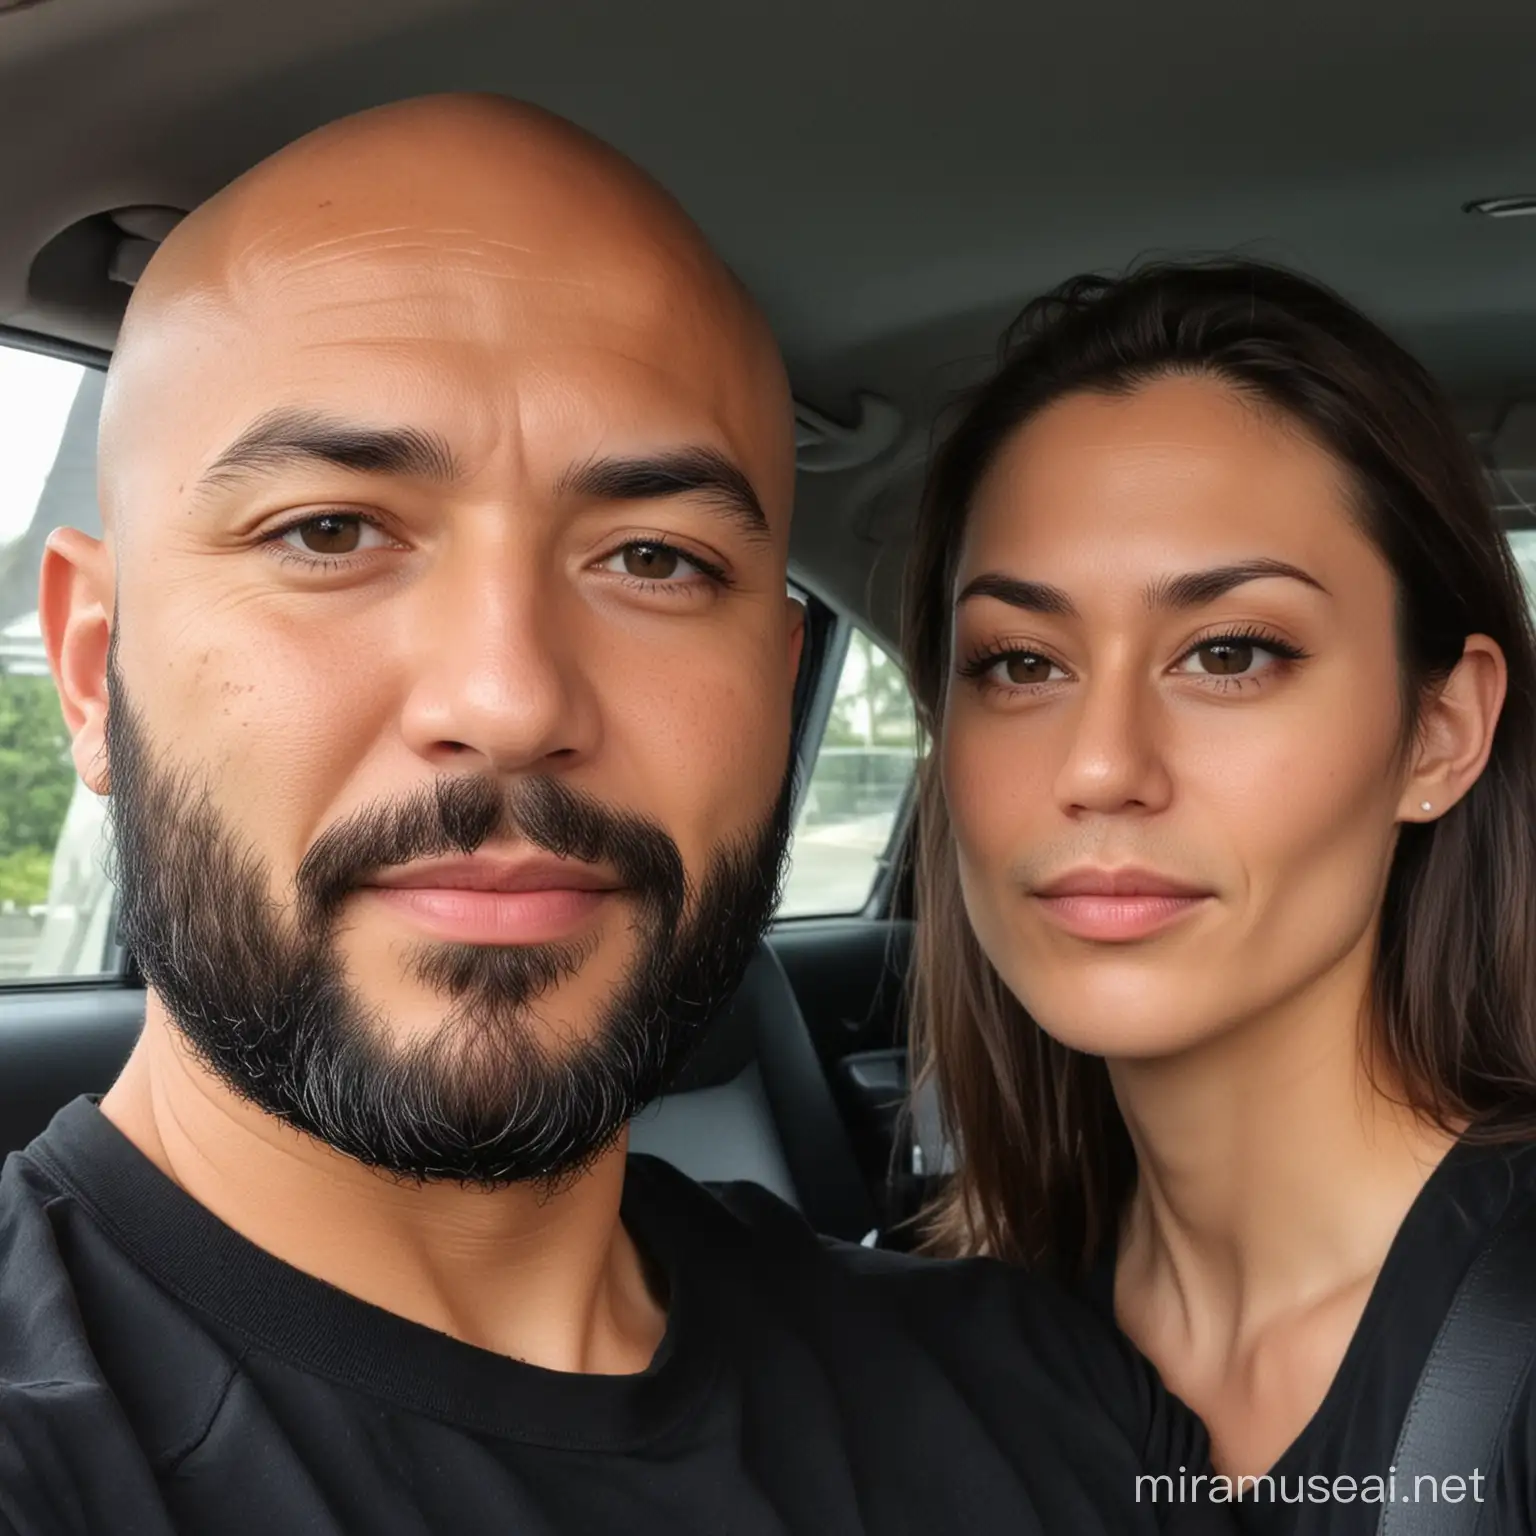 Bald Man and Bearded Woman in Car Portrait Early 2020s